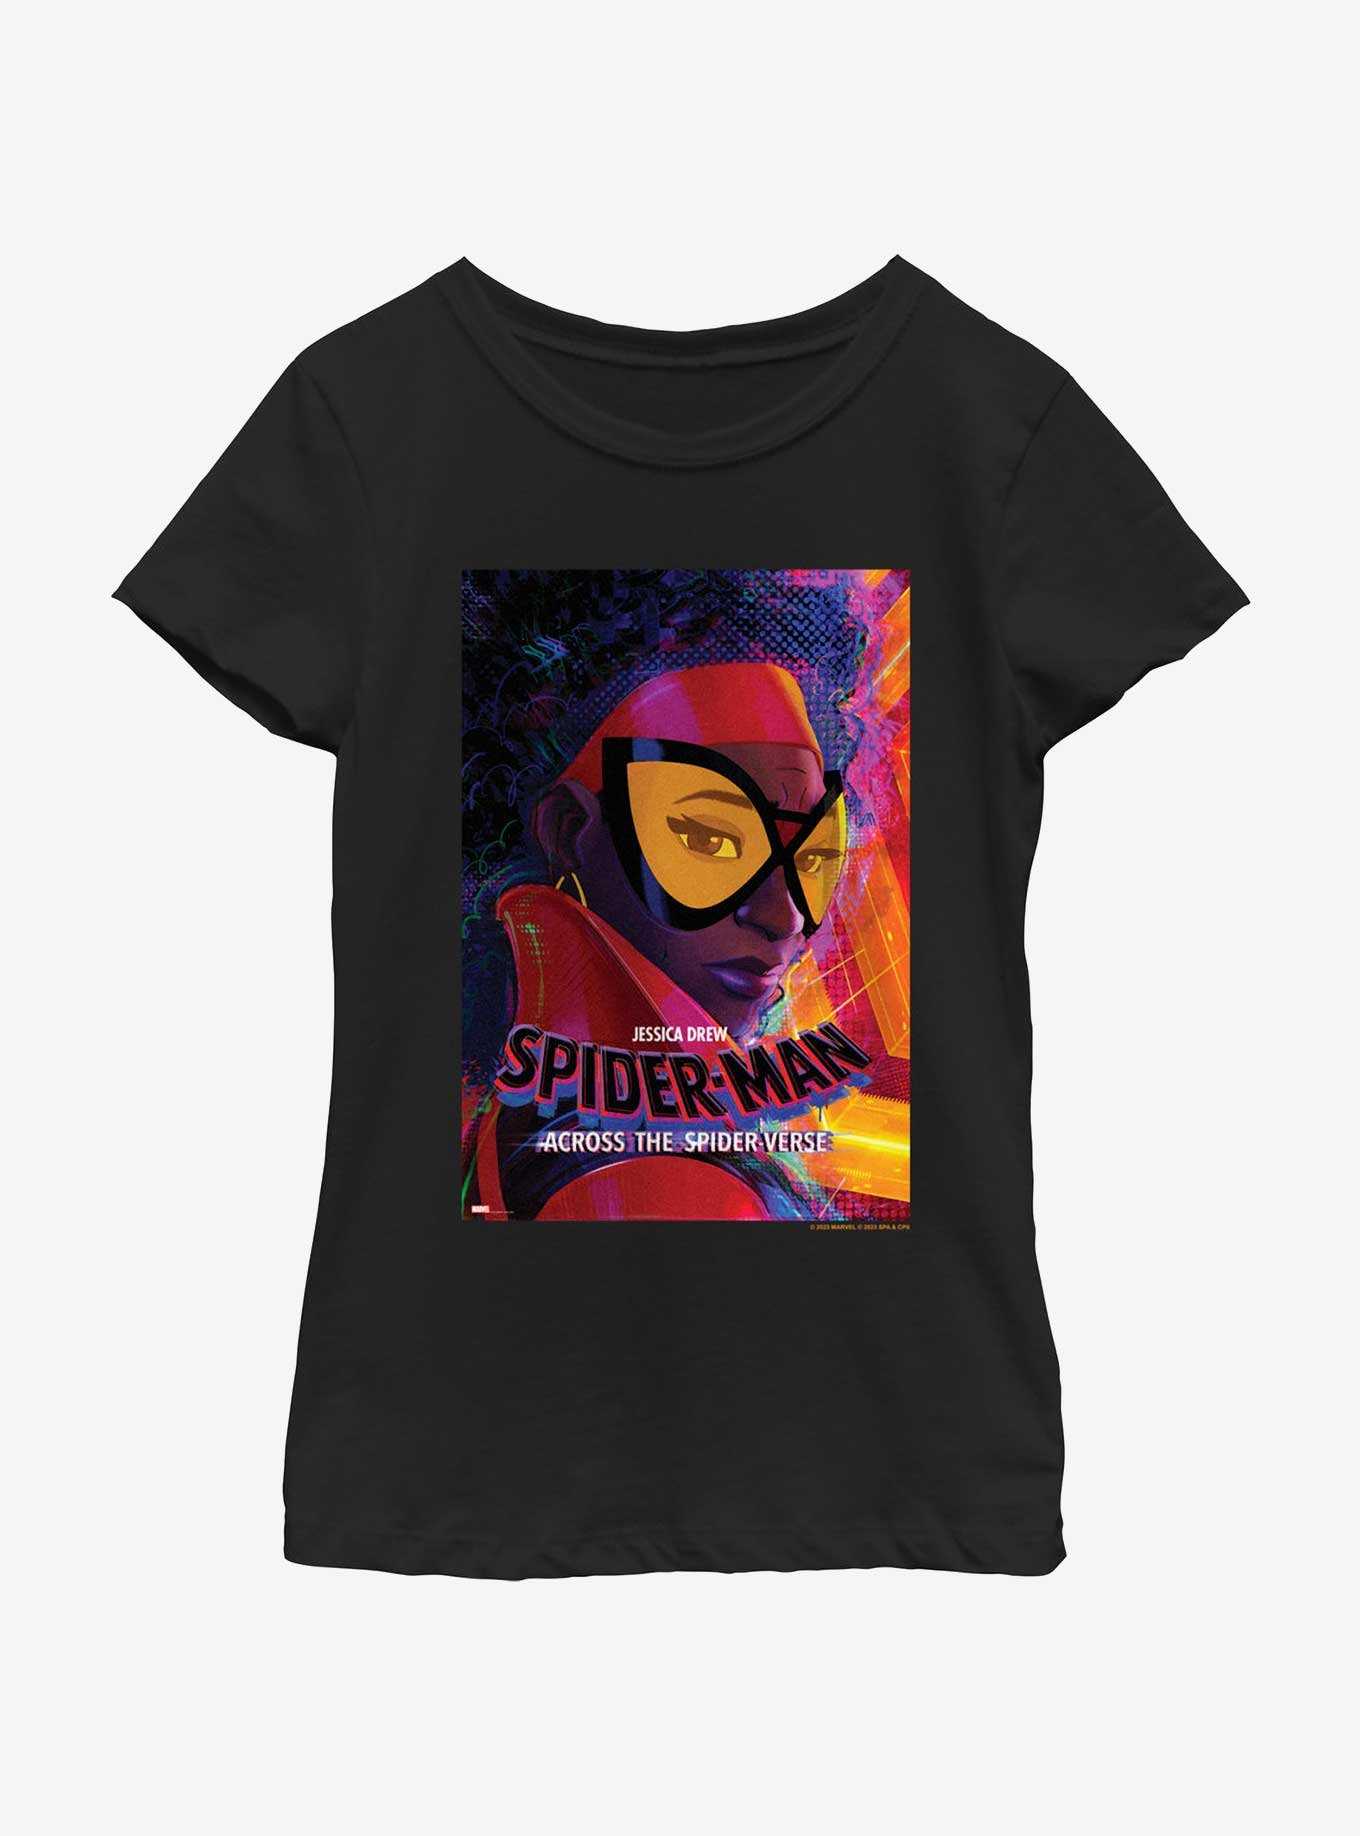 Spider-Man: Across The Spider-Verse Jessica Drew Spider-Woman Poster Youth Girls T-Shirt, , hi-res